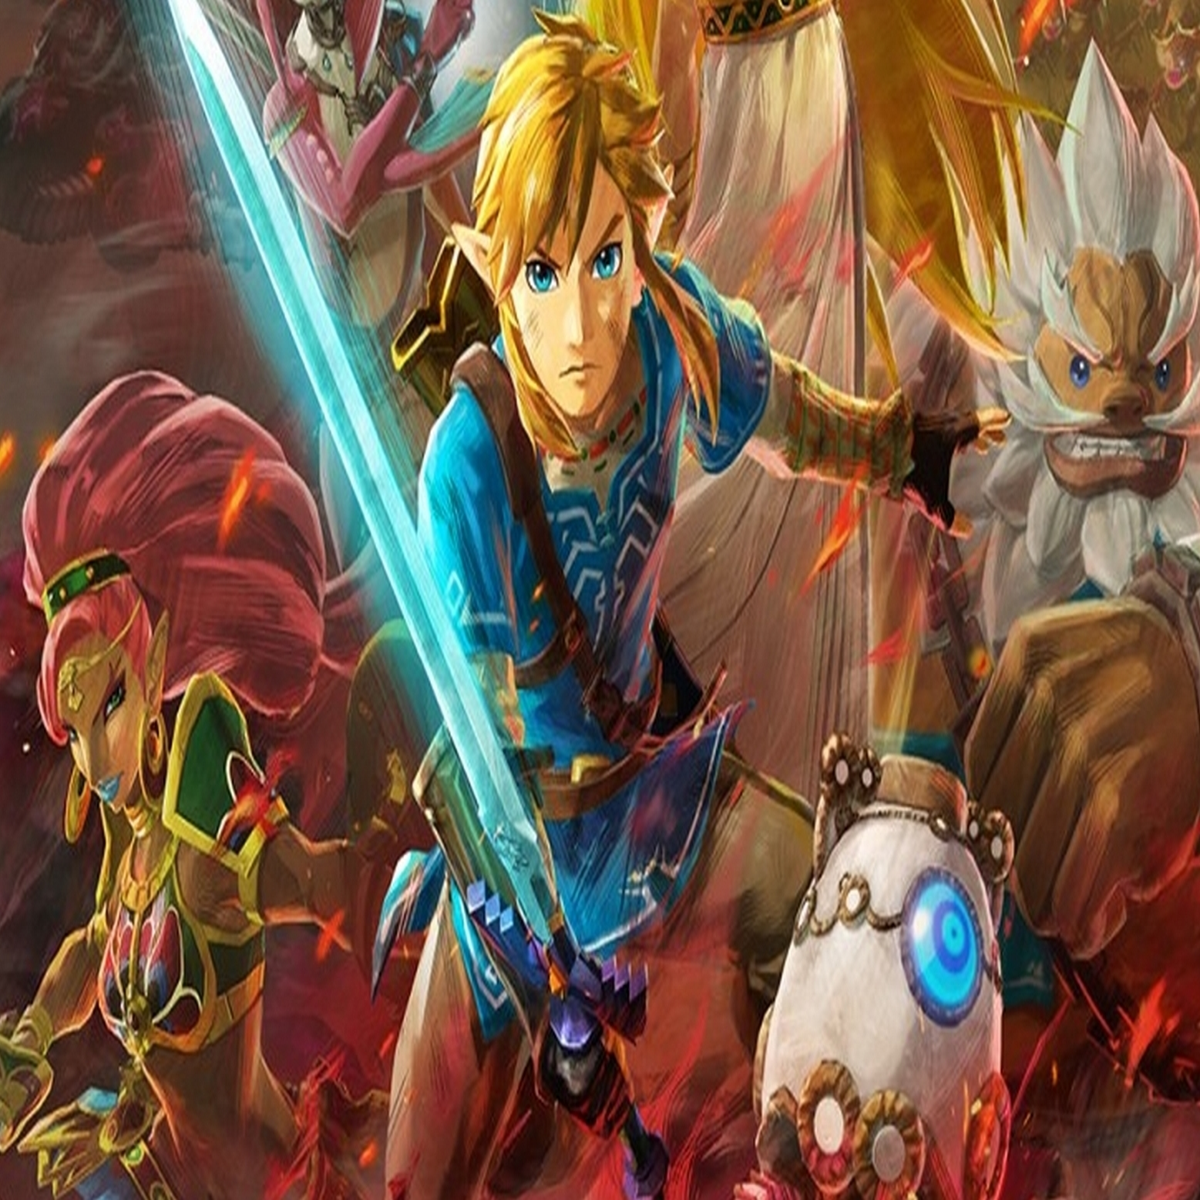 Hyrule Warriors: Age of Calamity (for Nintendo Switch) Review